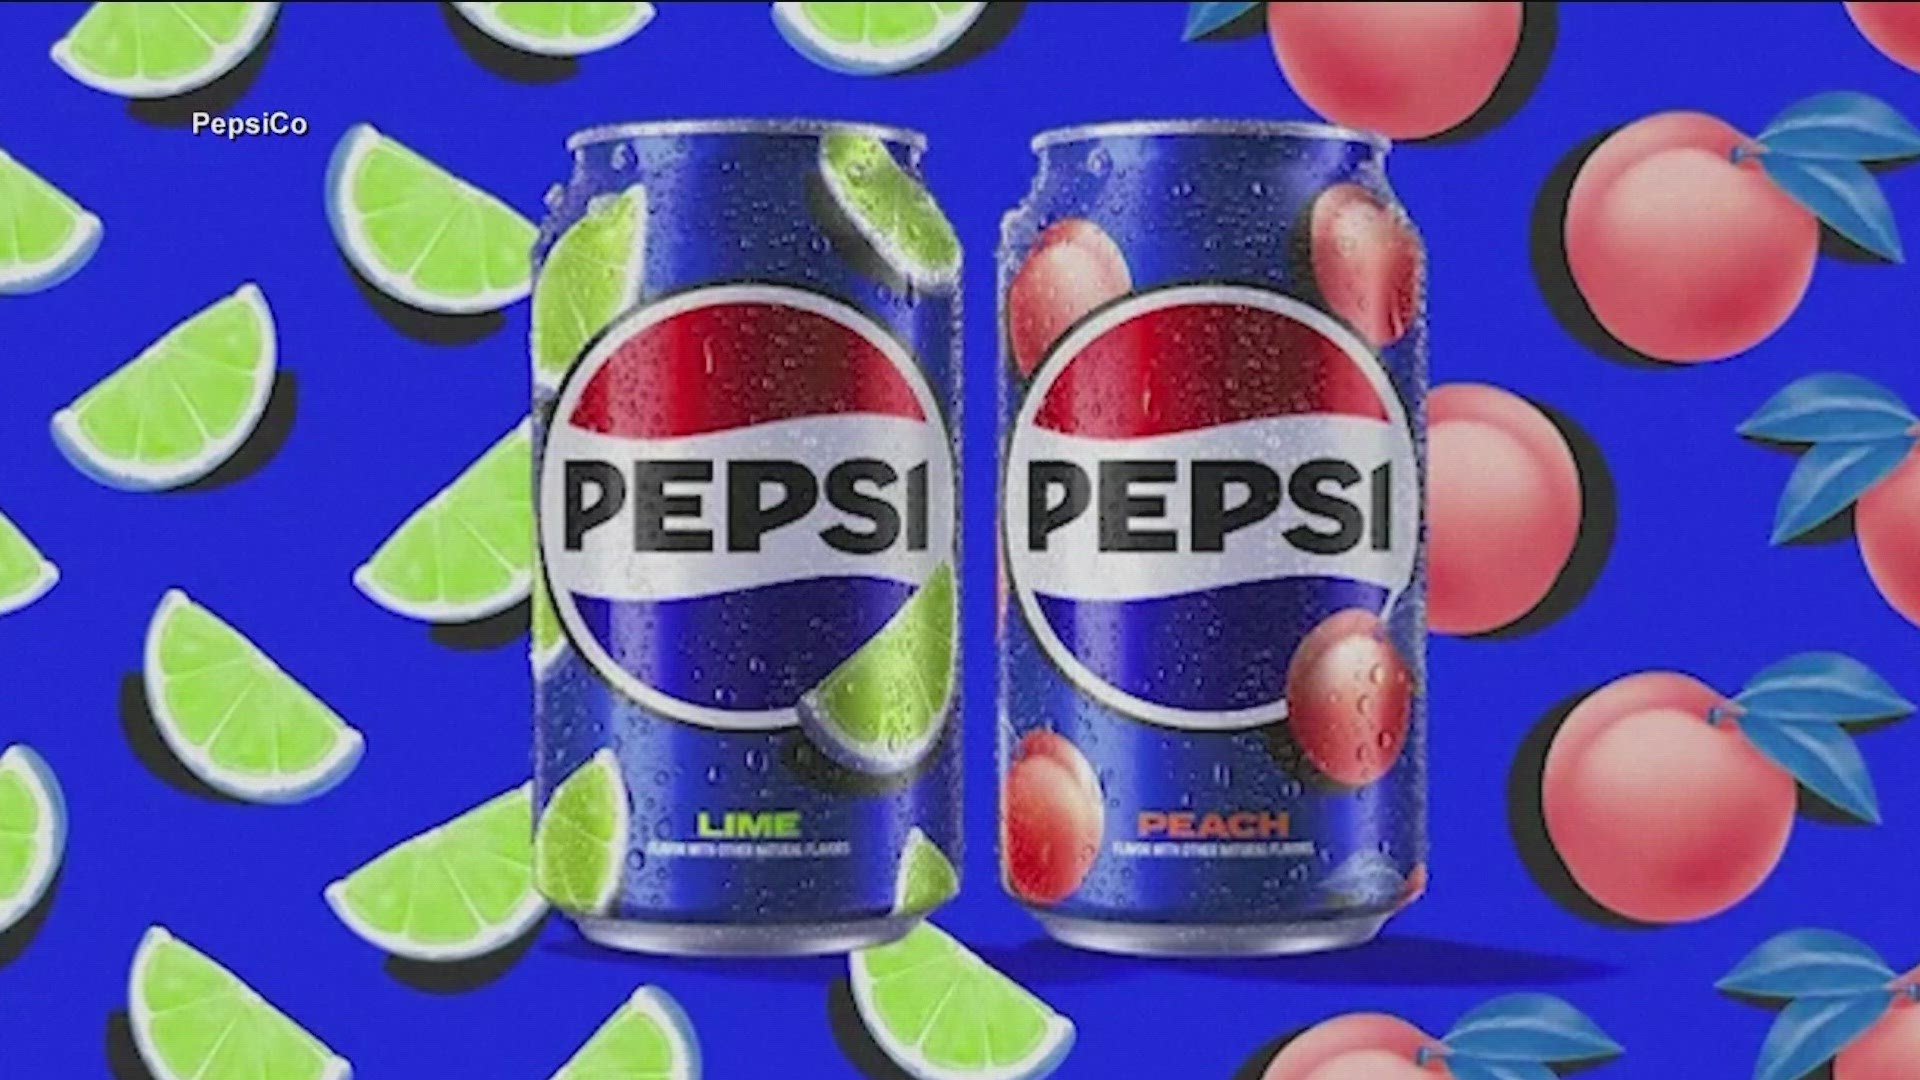 Pepsi Lime and Pepsi Peach will debut in the summer.